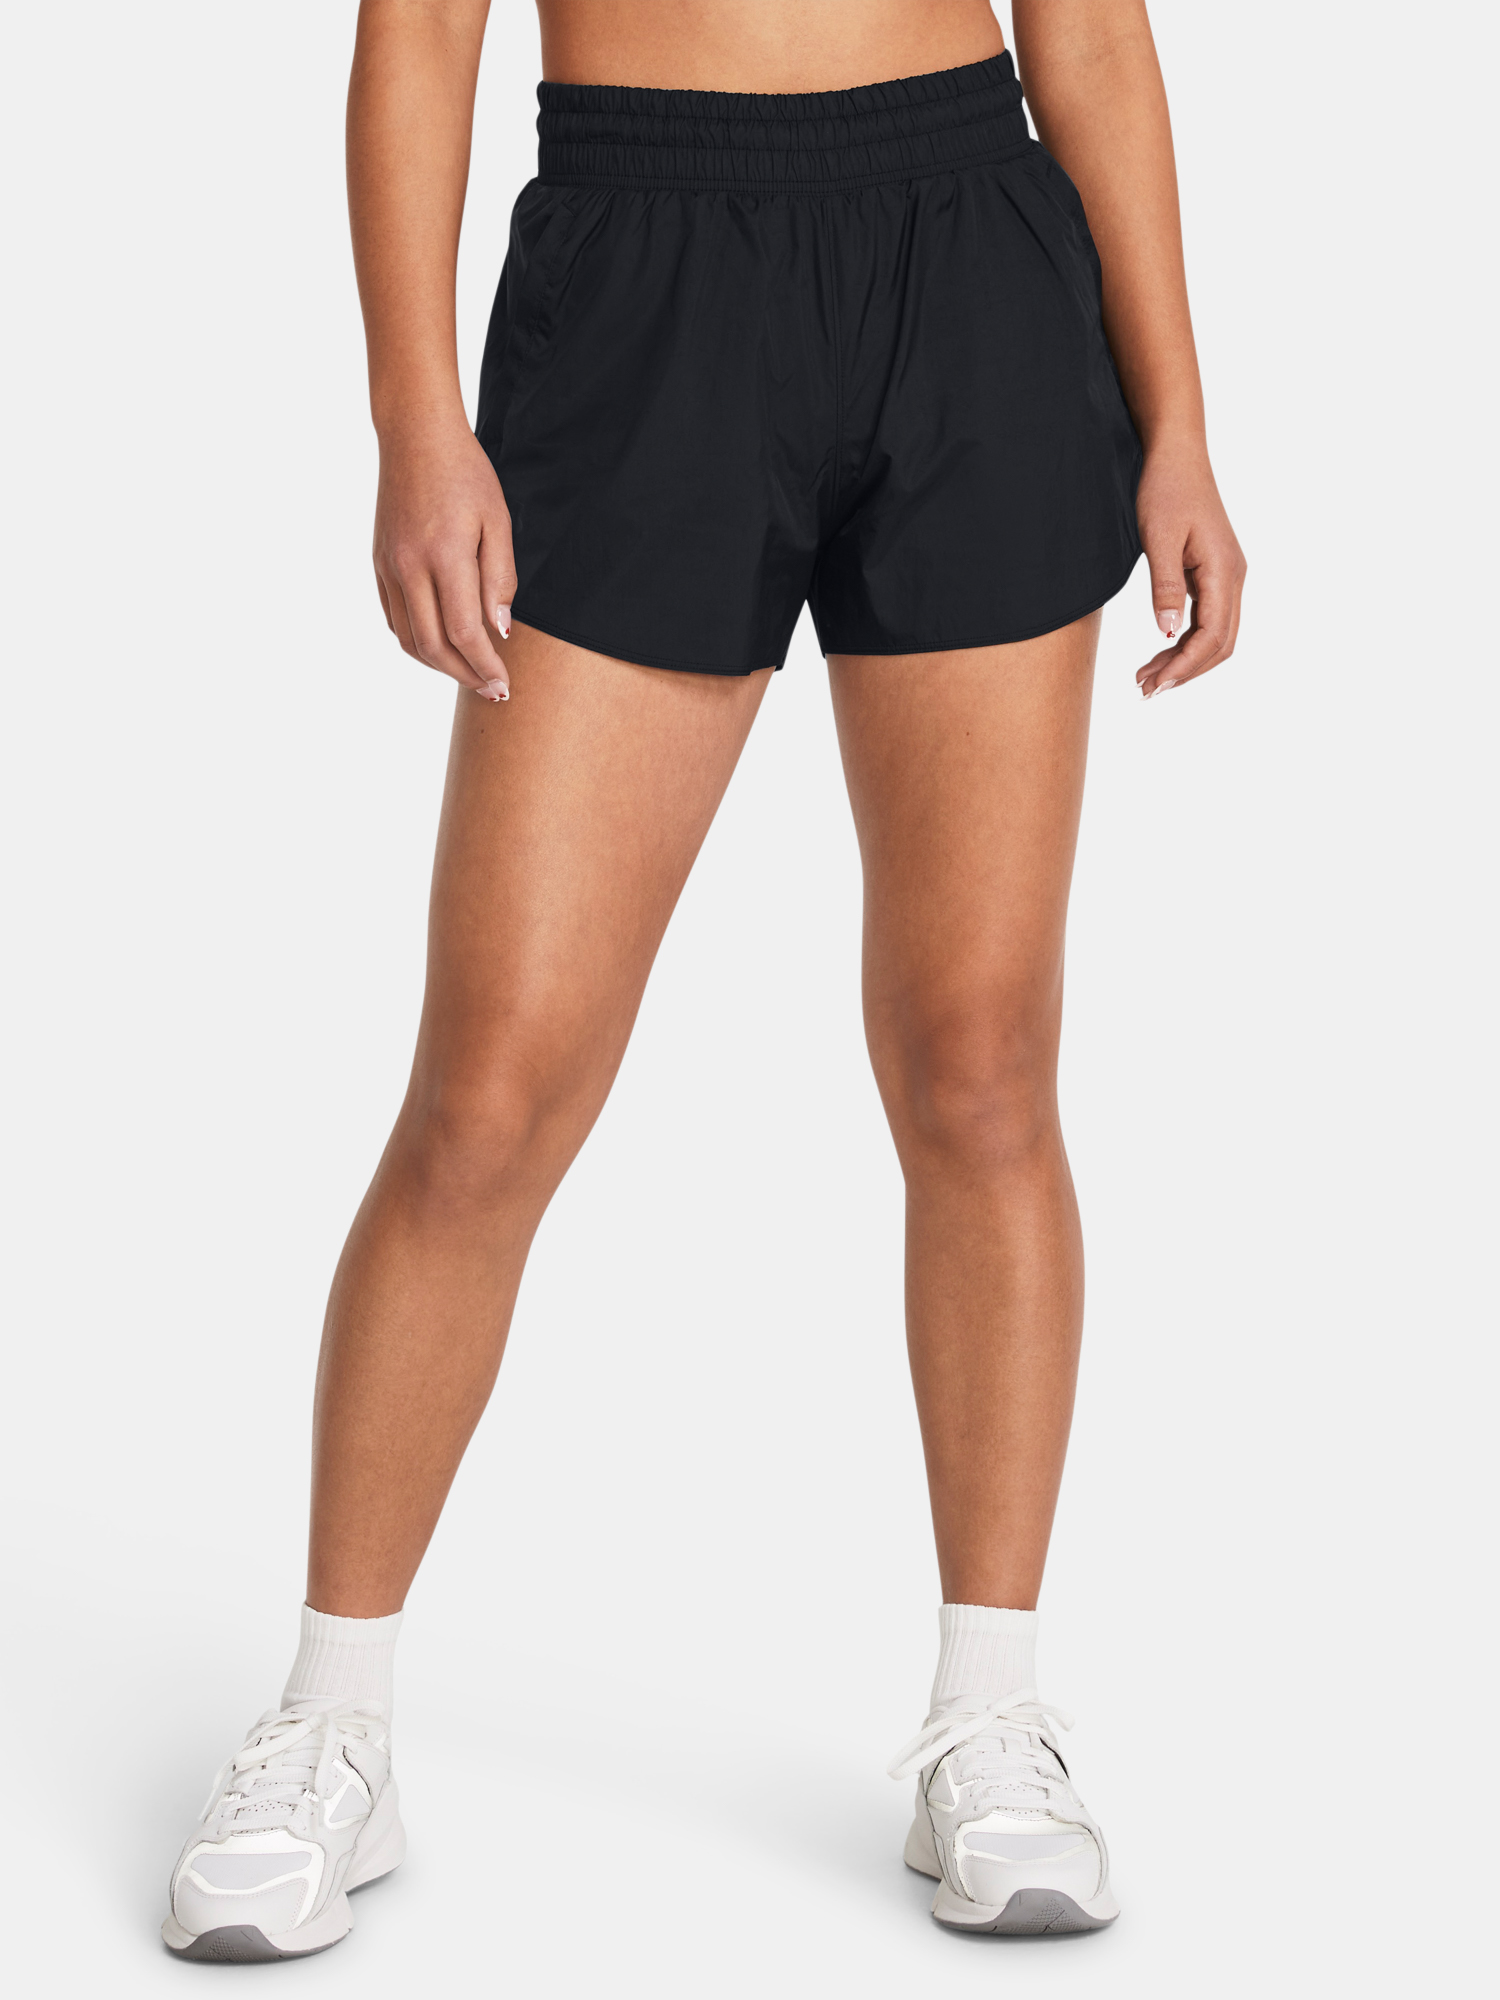 Under Armour Flex Woven 3in Crinkle Sts-BLK Shorts - Women